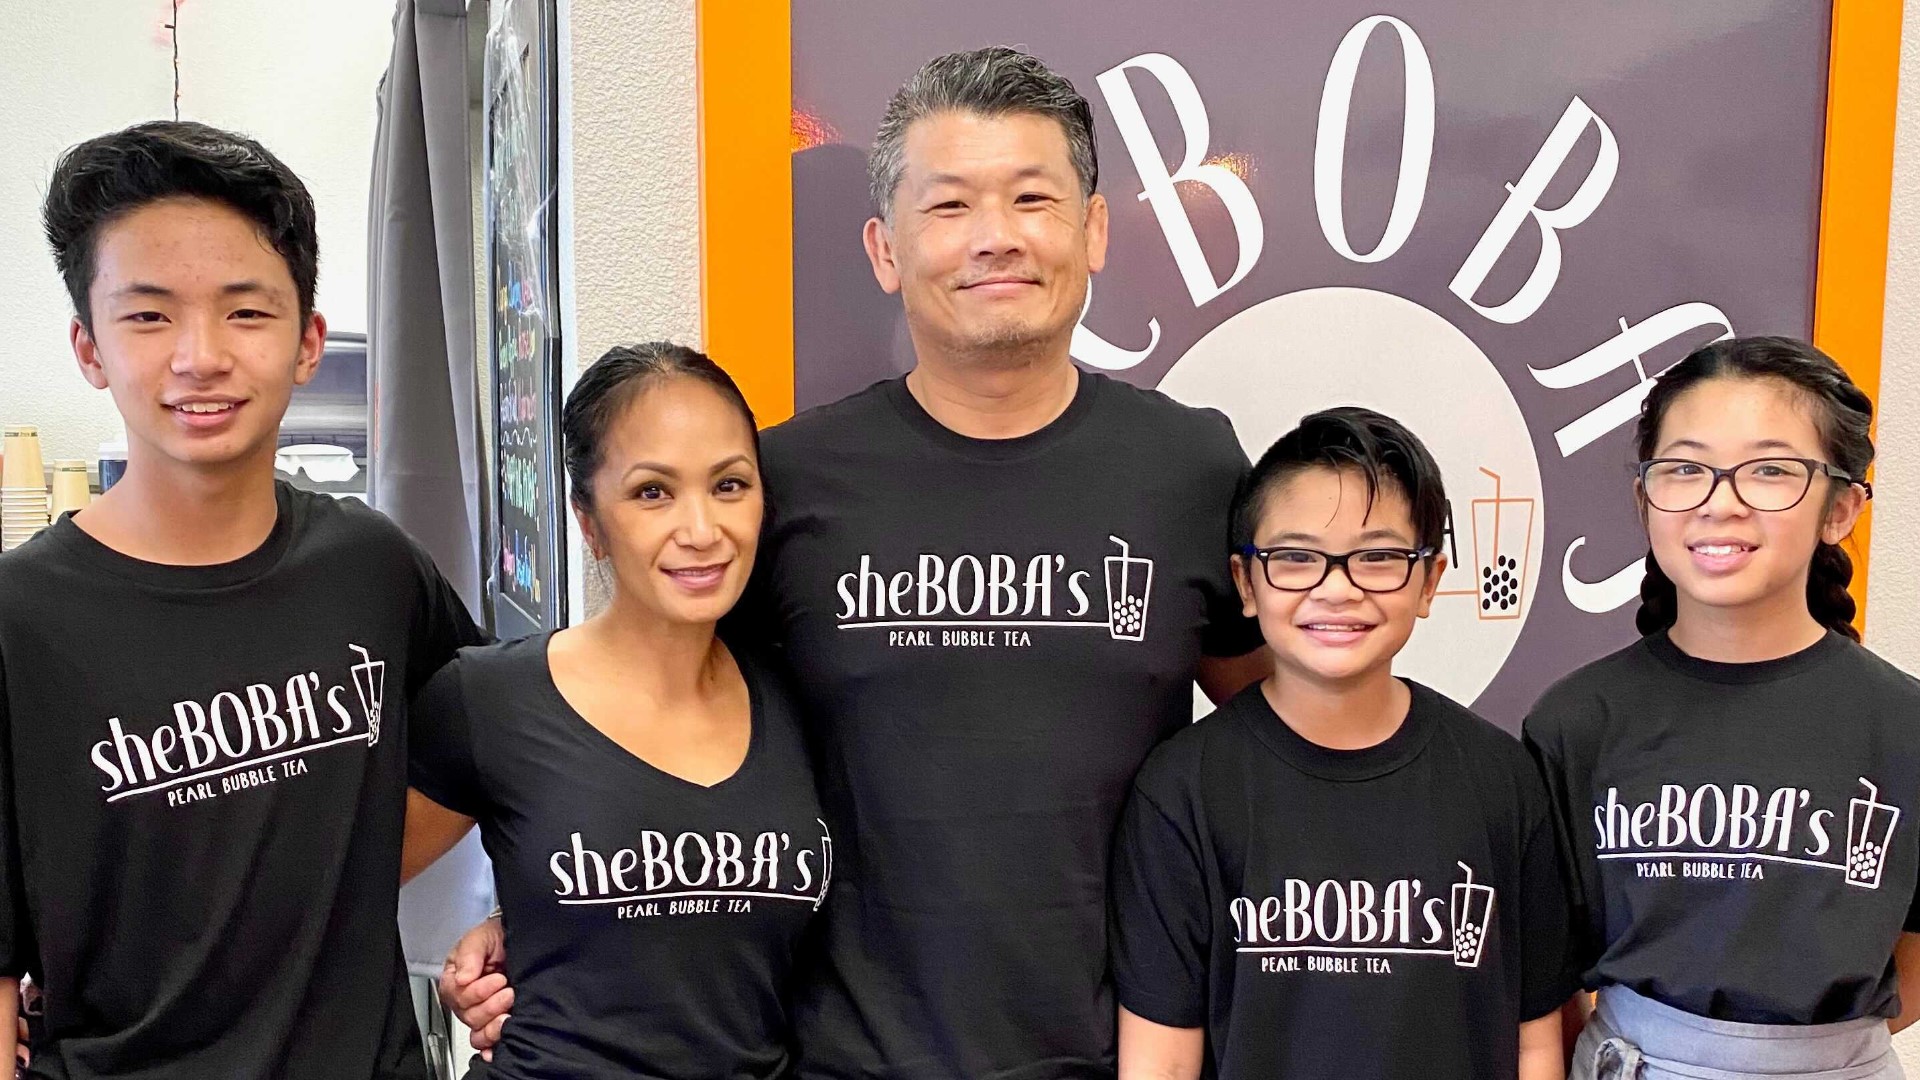 Archie and Sheroba Chu are still hopeful about the future of sheBOBA's in Ripon after nearly a year of California lockdowns.